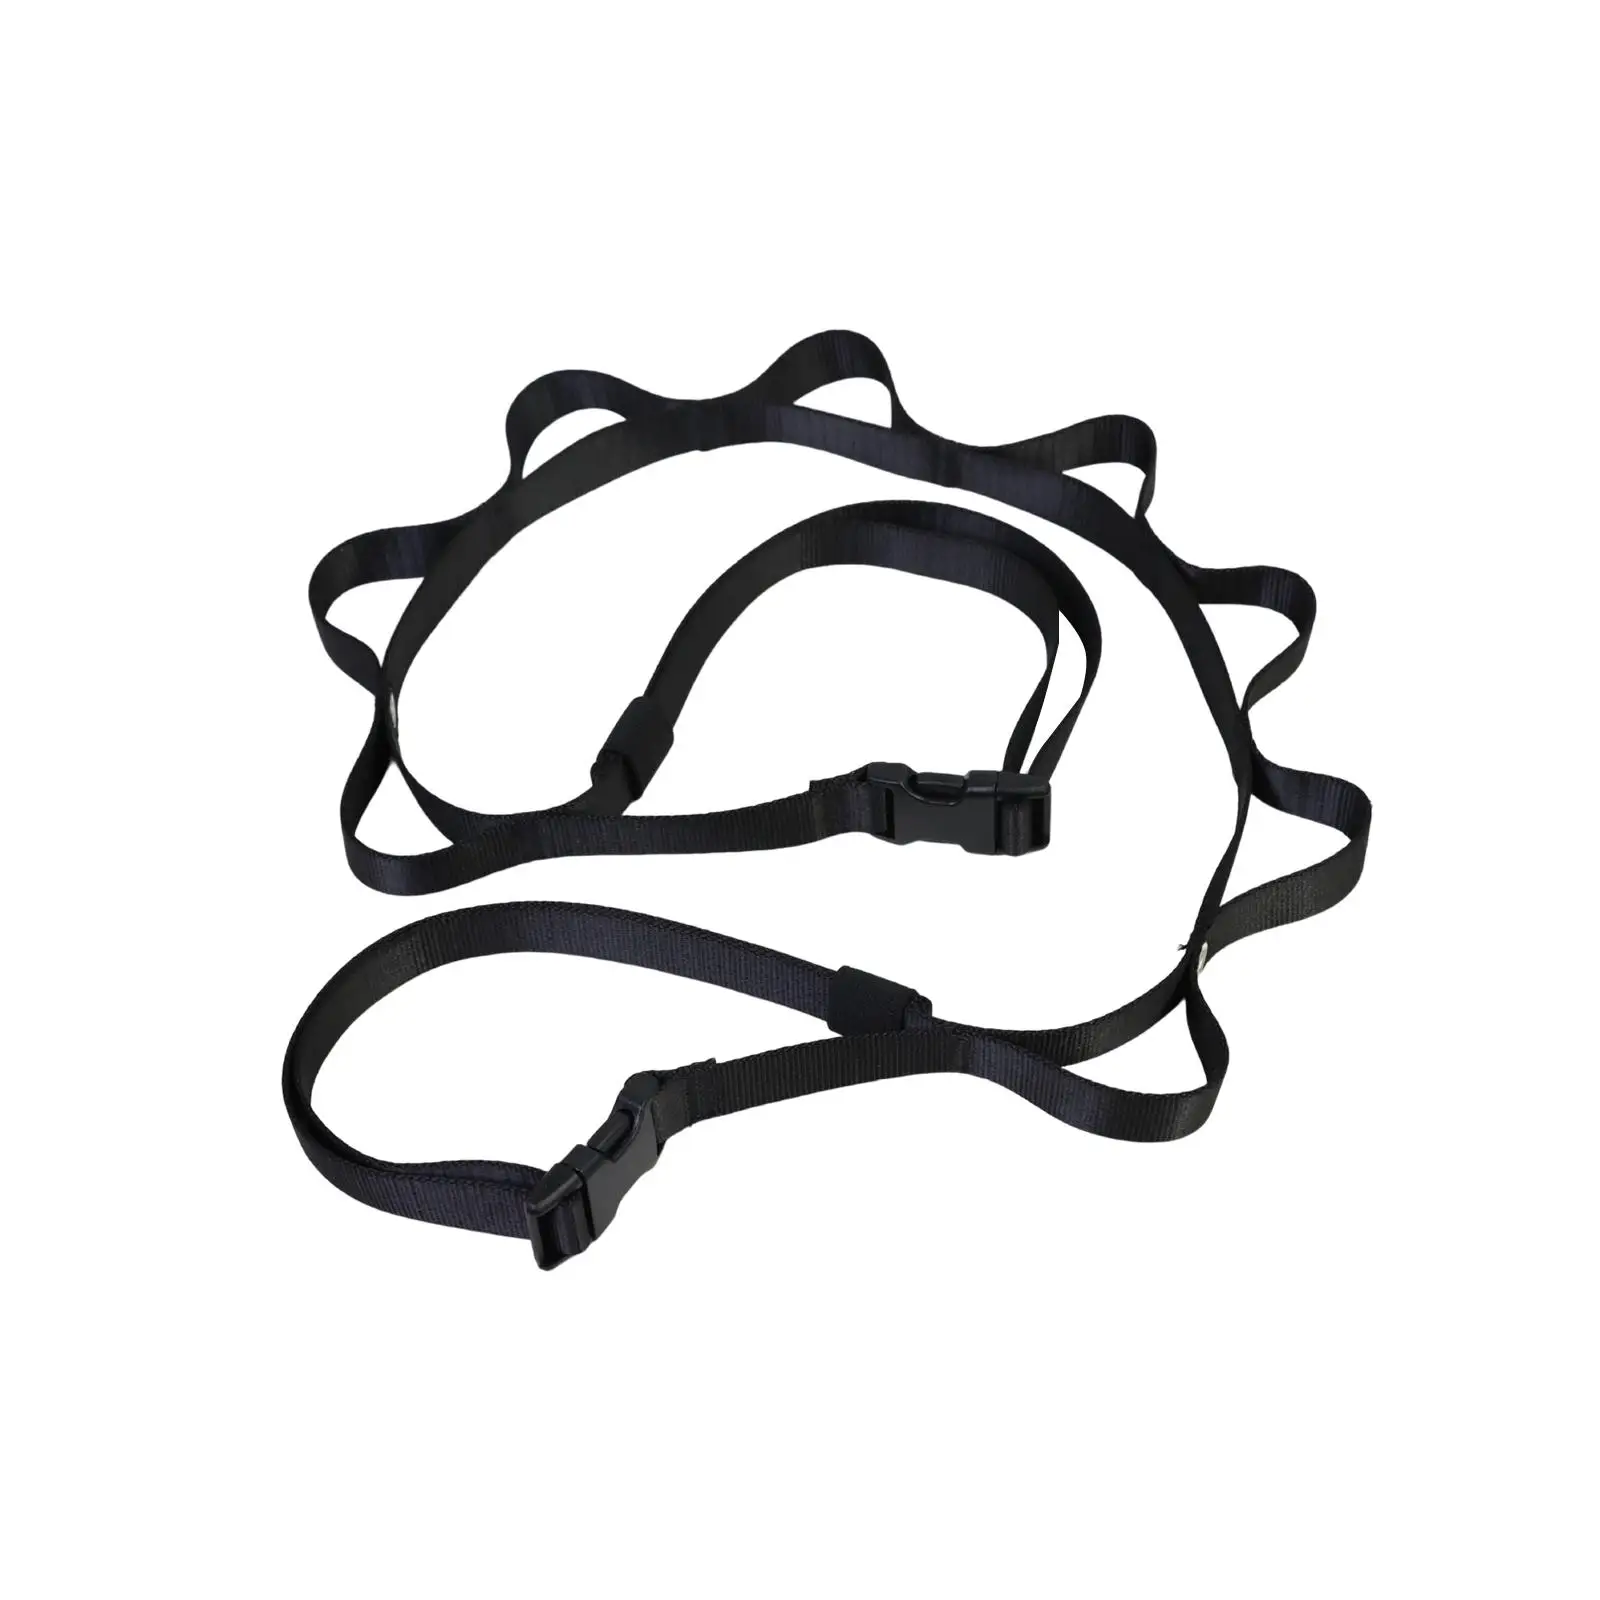 Car Clothesline Heavy Duty Tension Belt Car Luggage Cord Rope Luggage Straps for Cargo Hand Carts Luggage Rack Motorcycle Travel